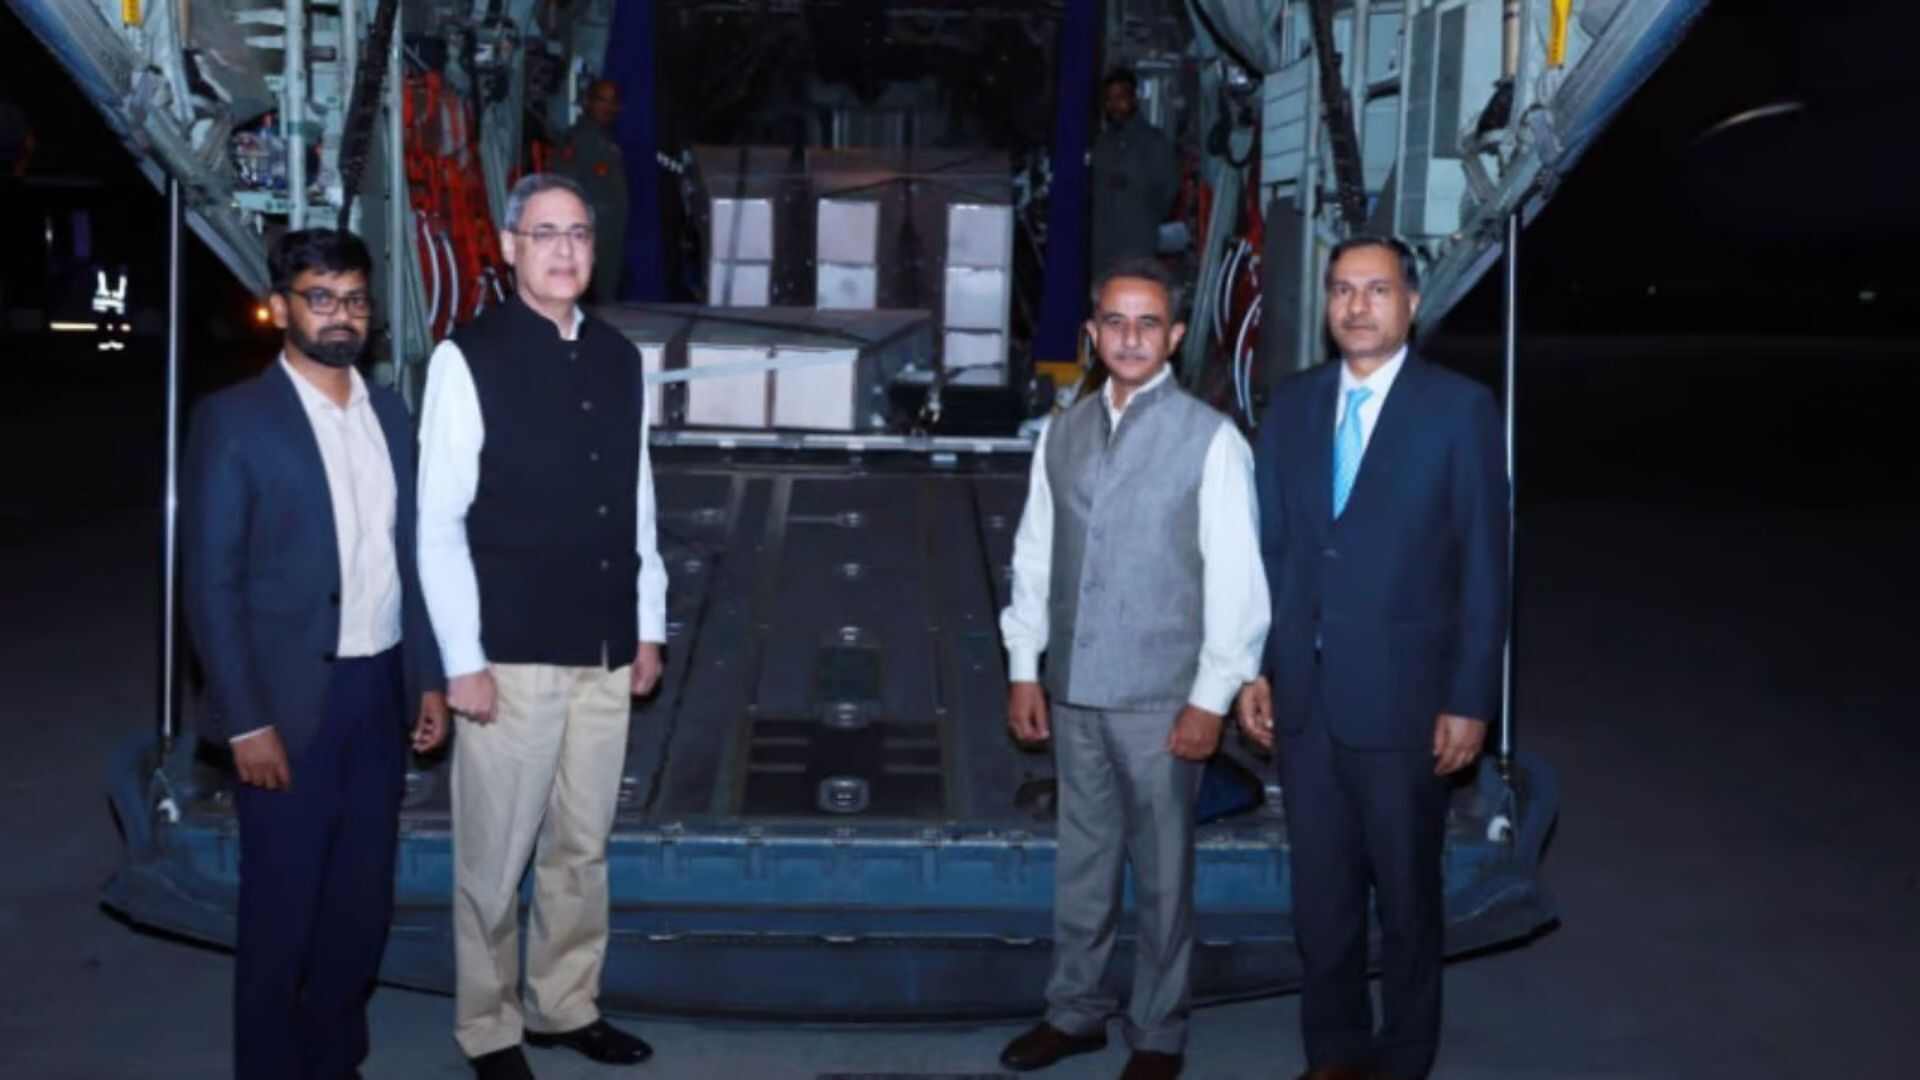 ‘Insensitive Picture’: Indian Embassy In Kuwait Deletes X Post After Backlash Over MoS Kirti Vardhan Singh, Officials Posing With Coffins